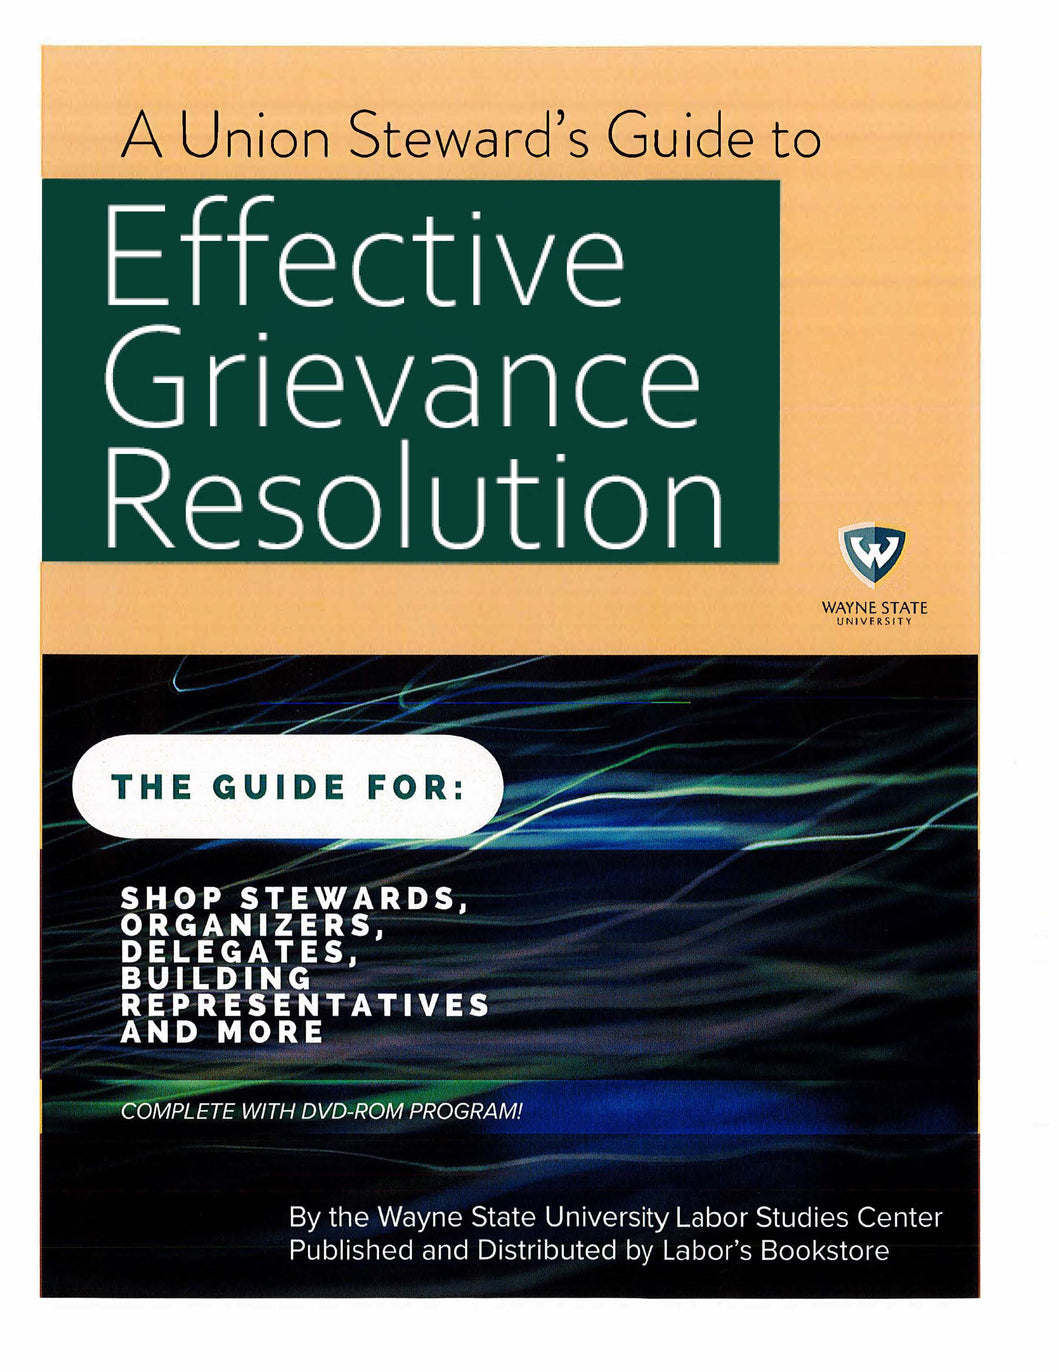 A Union Steward's Guide to Effective Grievance Resolution (DVD) plus PDF instructional booklet